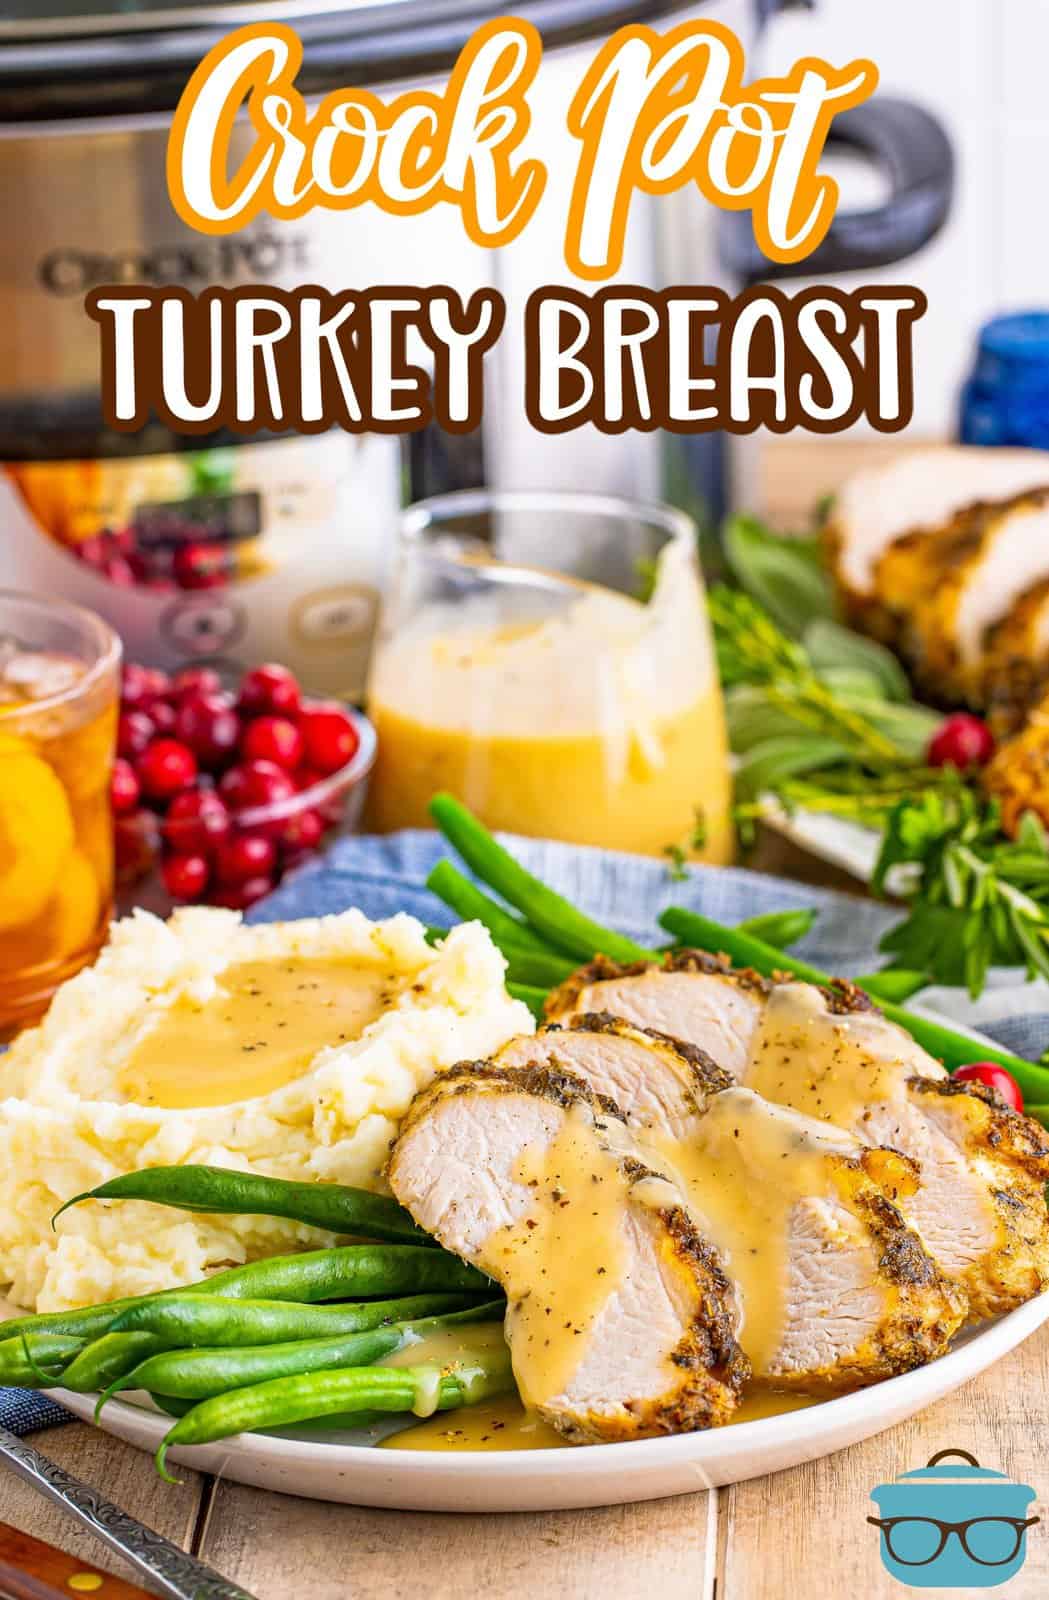 Pinterest image of sliced up Crock Pot Turkey Breast on plate with sides.